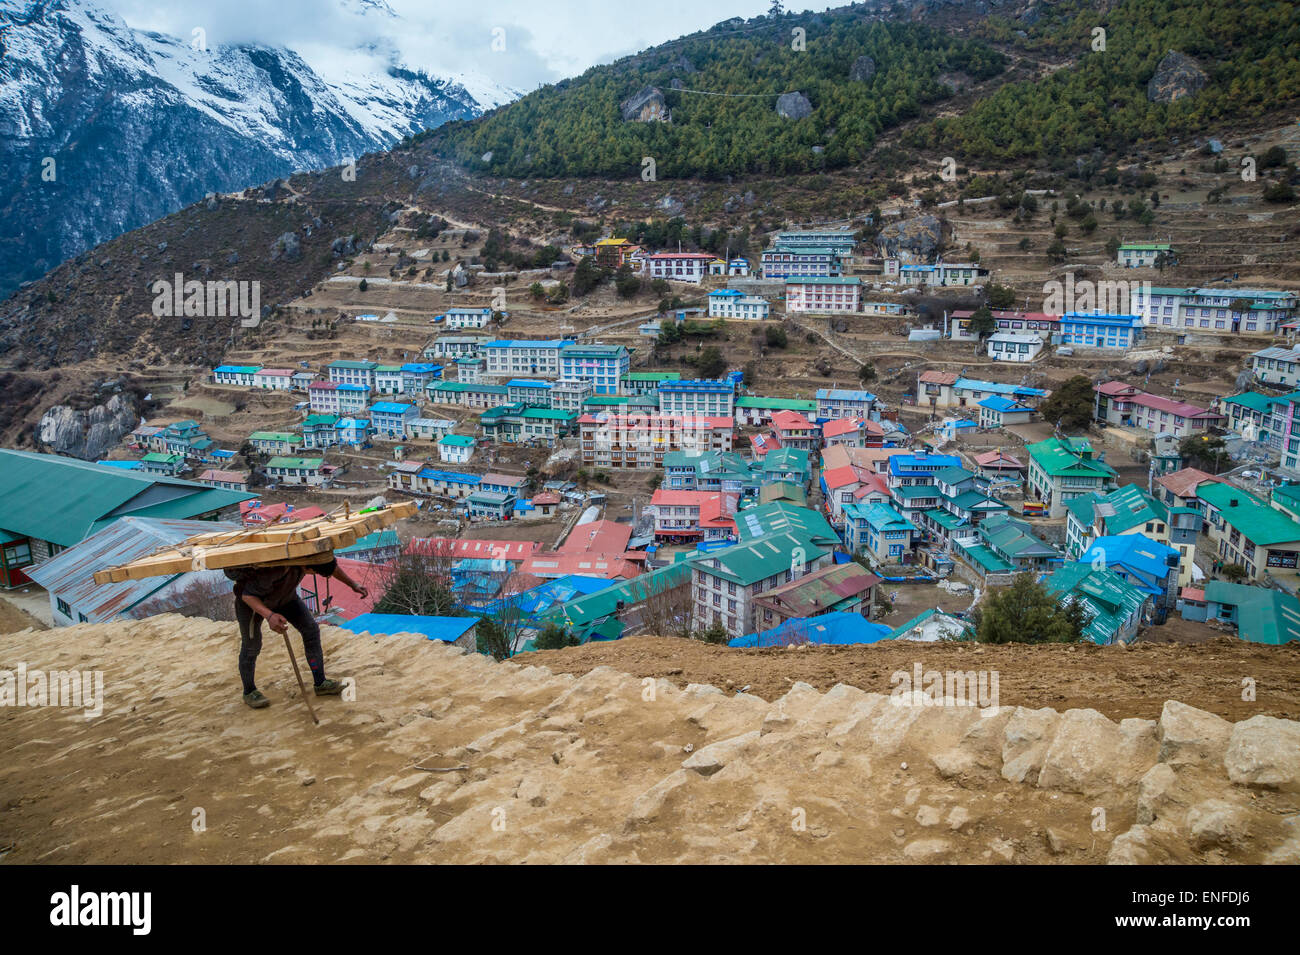 Namche Bazaar, Nepal - 9 March 2015: View of a a Nepalese porter carrying a heavy load Stock Photo